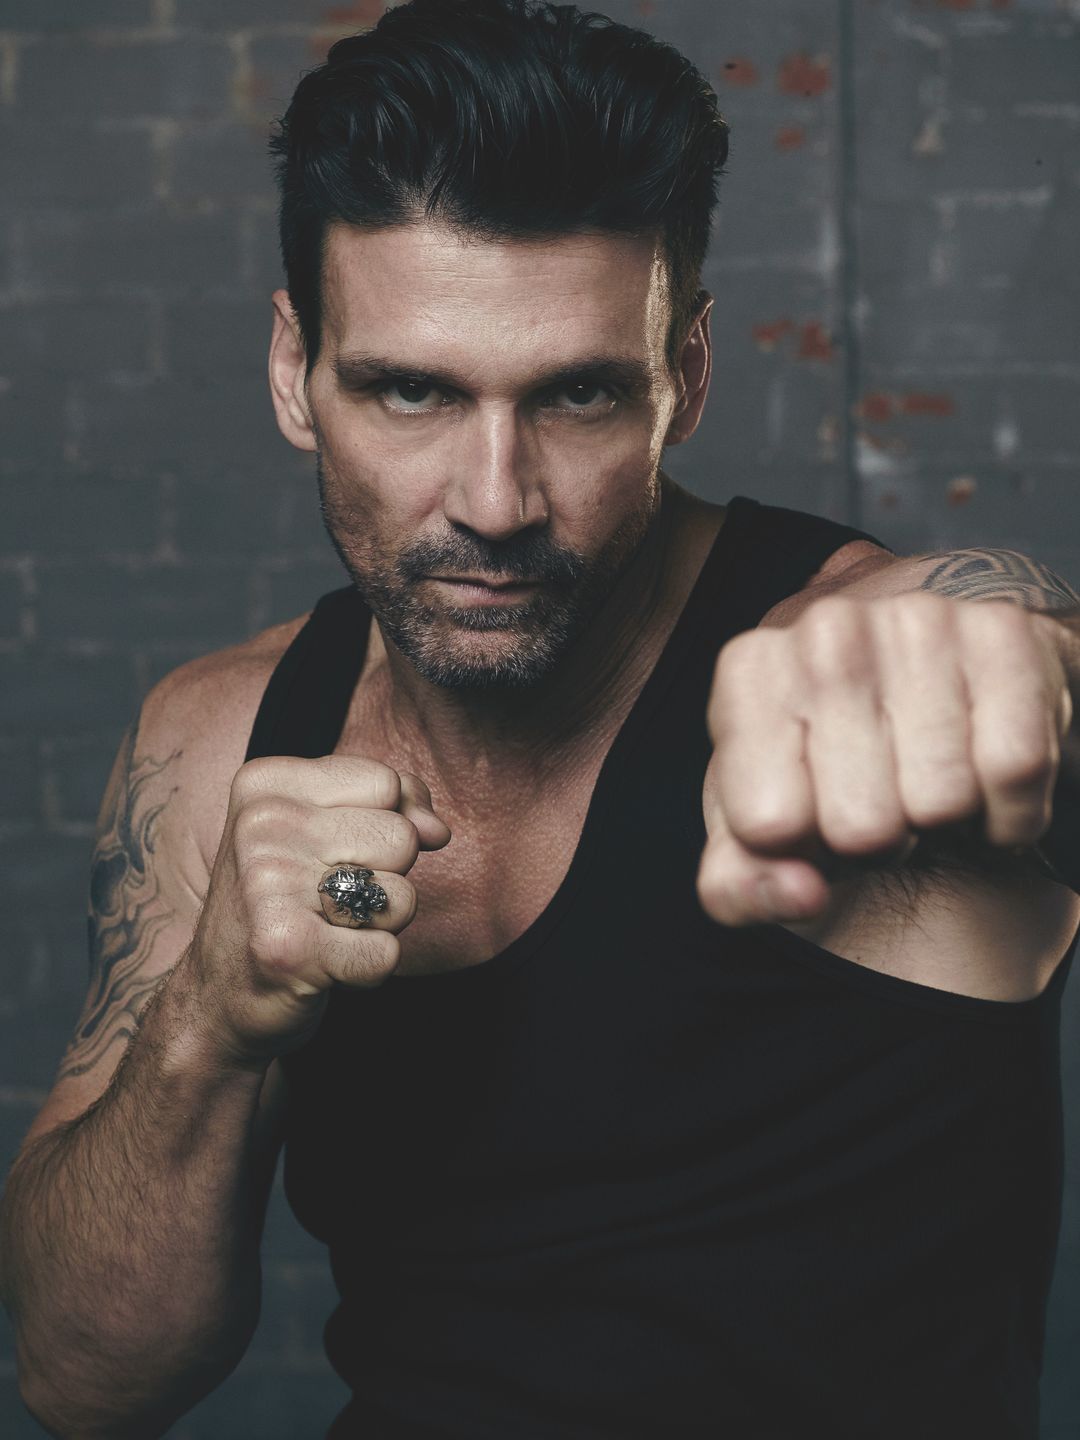 Frank Grillo story of success